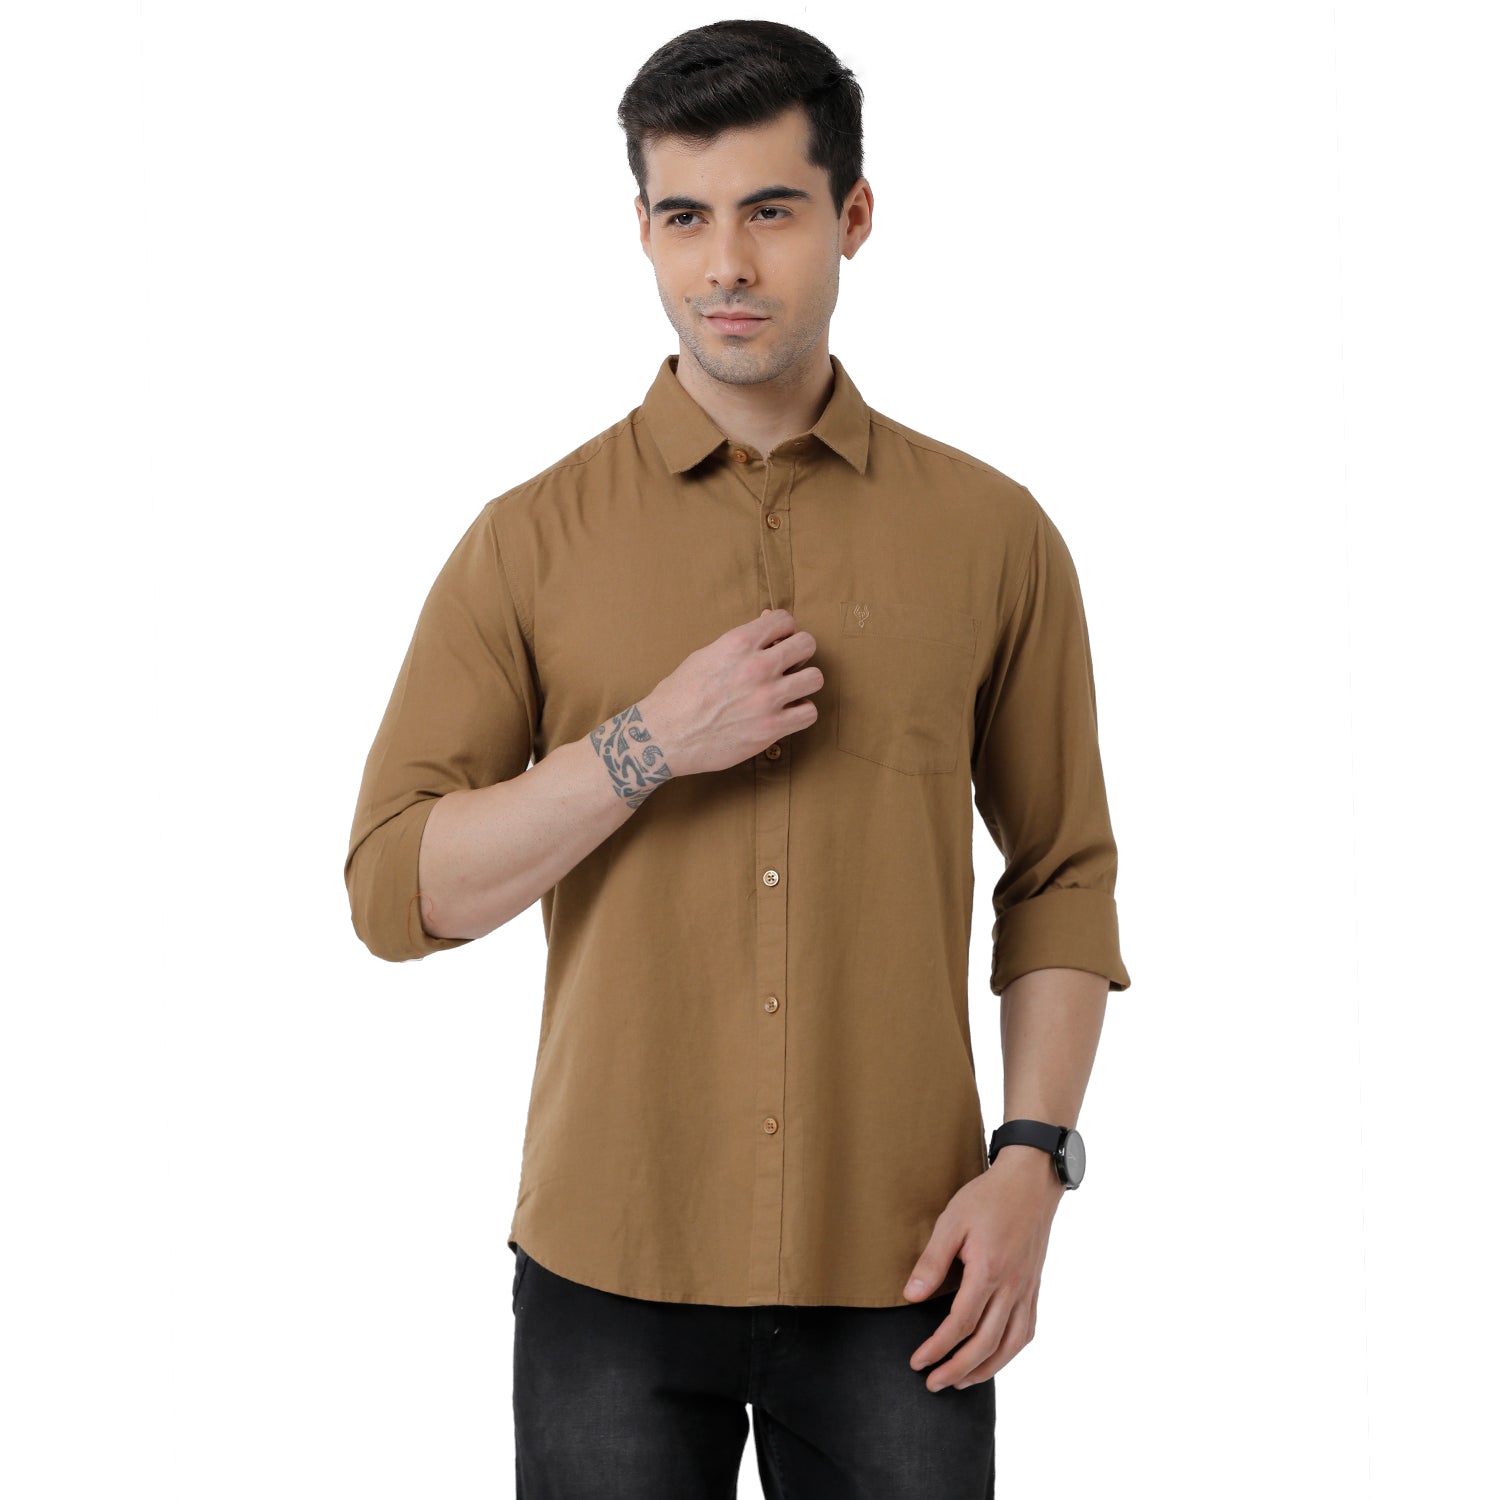 Classic Polo Mens Solid Slim Fit Full Sleeve Brown Color Shirt - SN1-111 B Shirts Classic Polo 